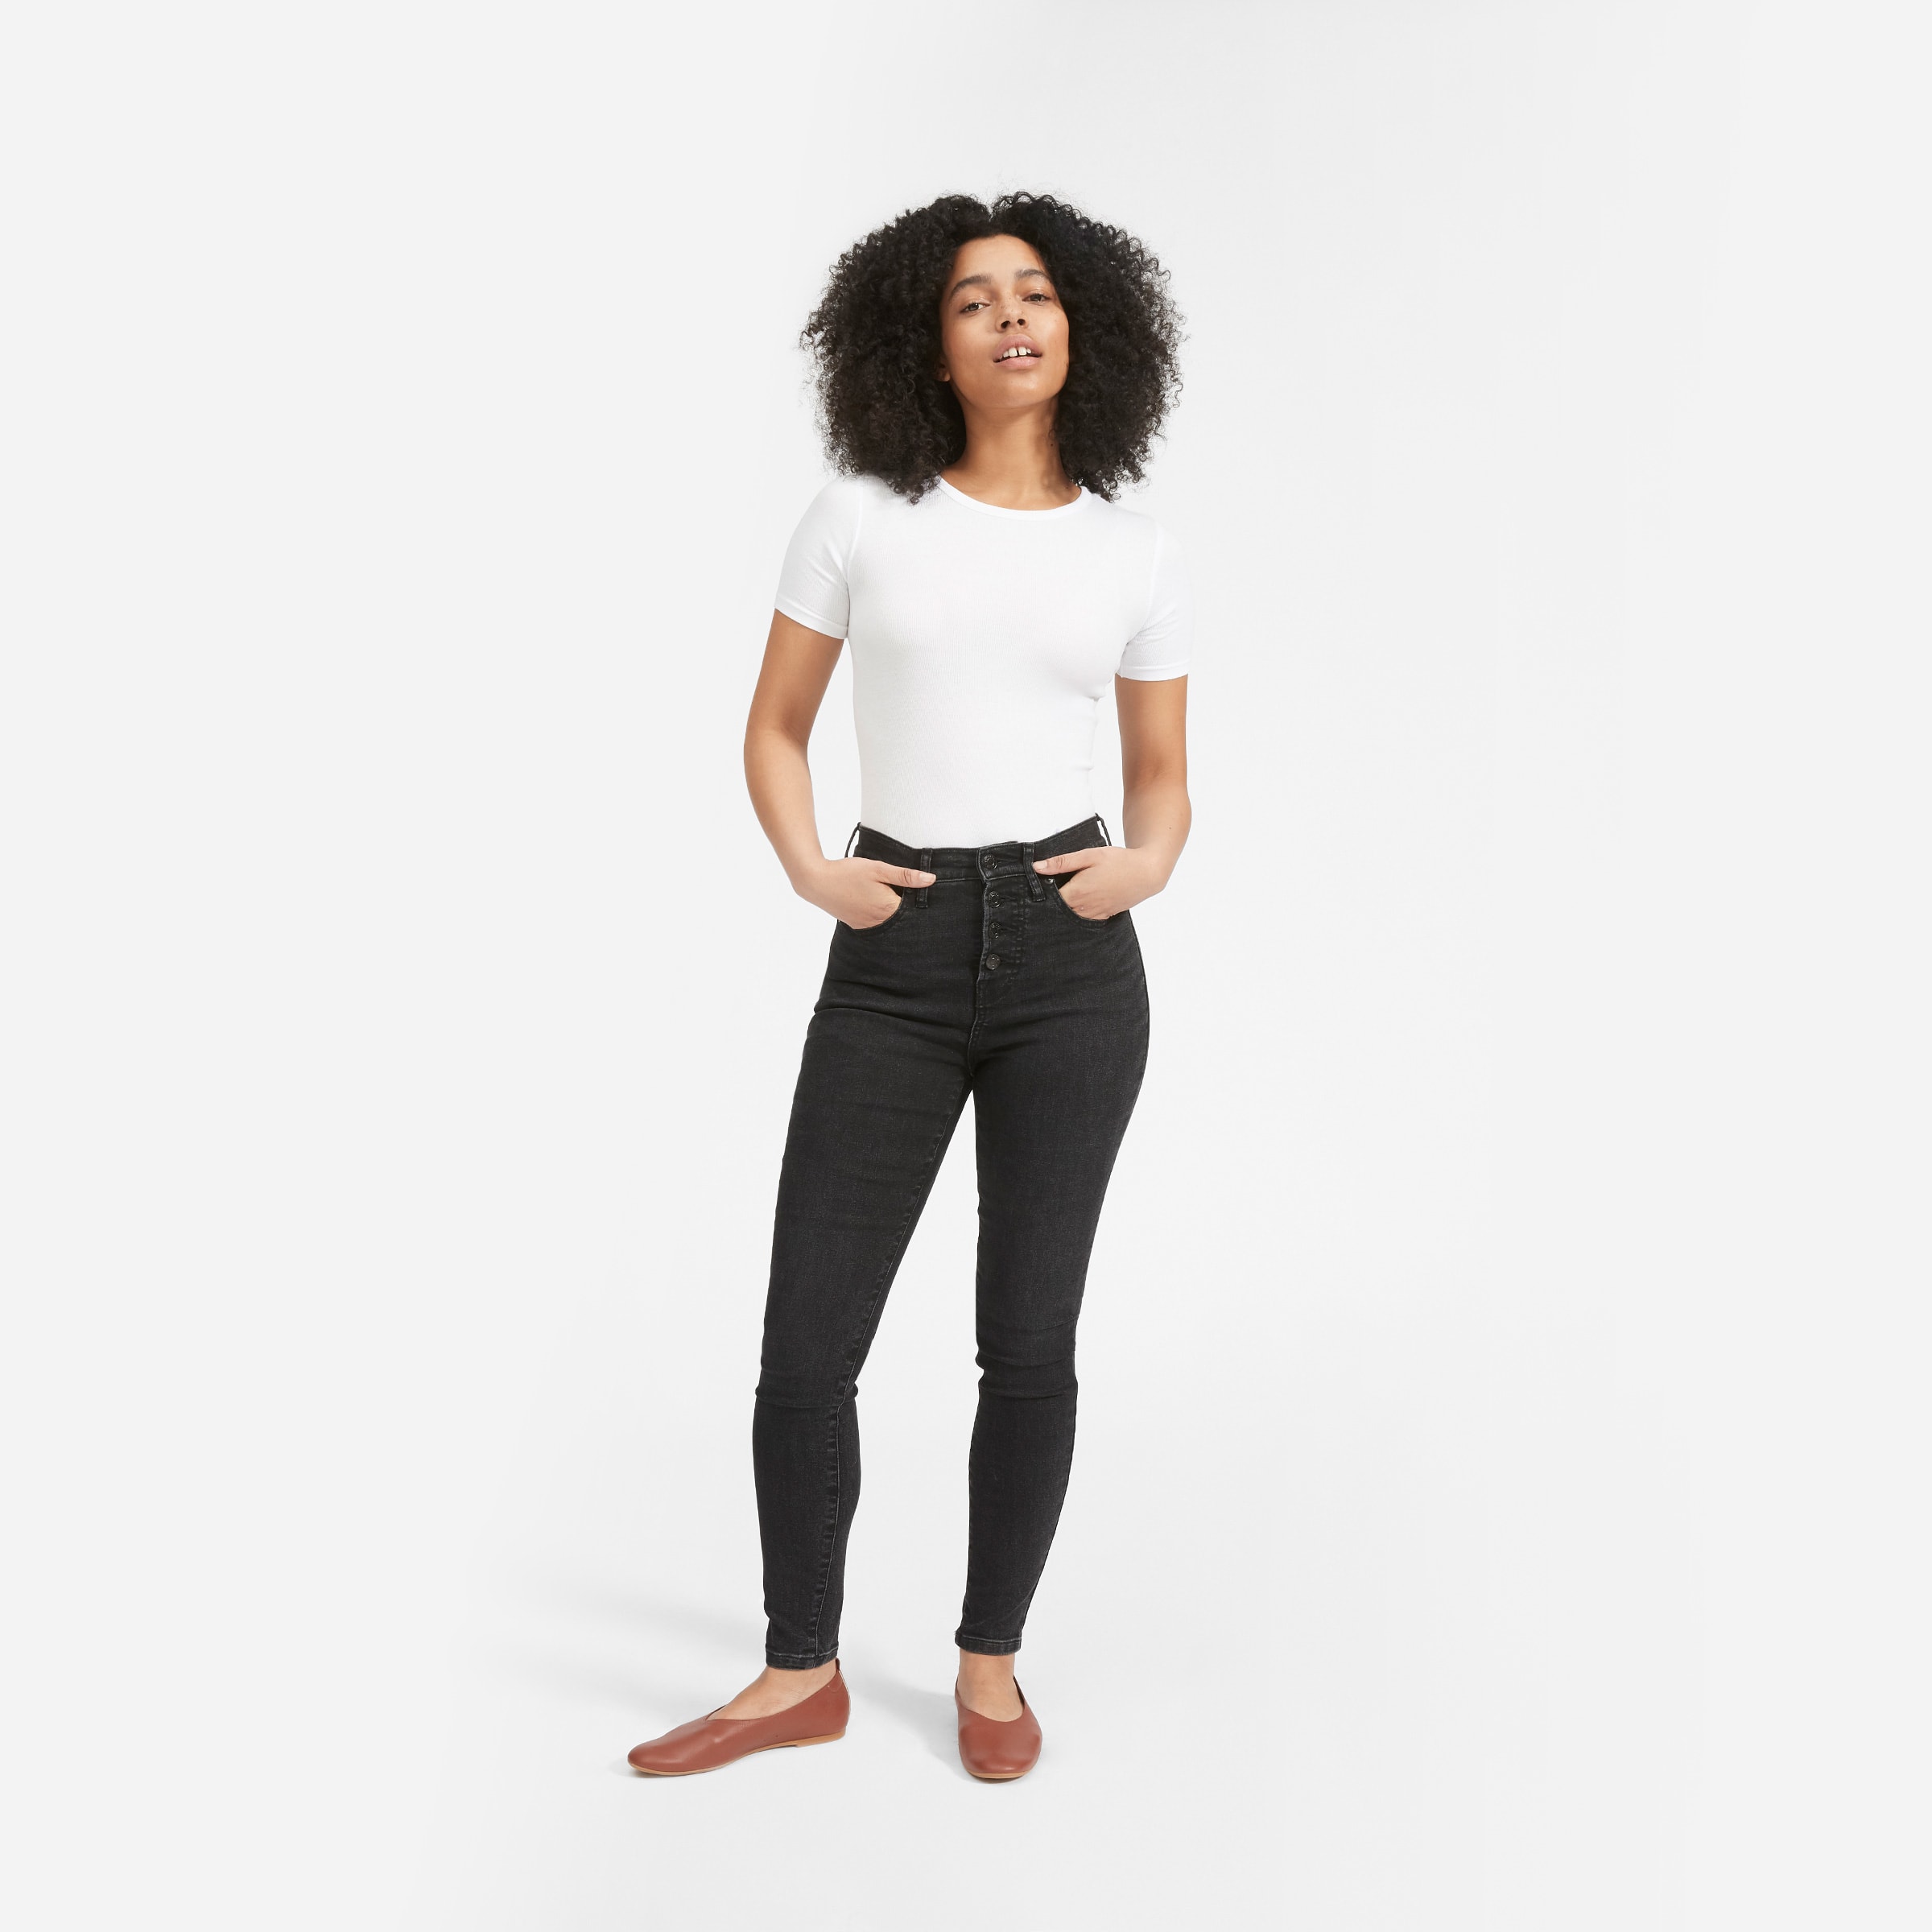 Everlane High Rise Jeans in Washed Black size 27